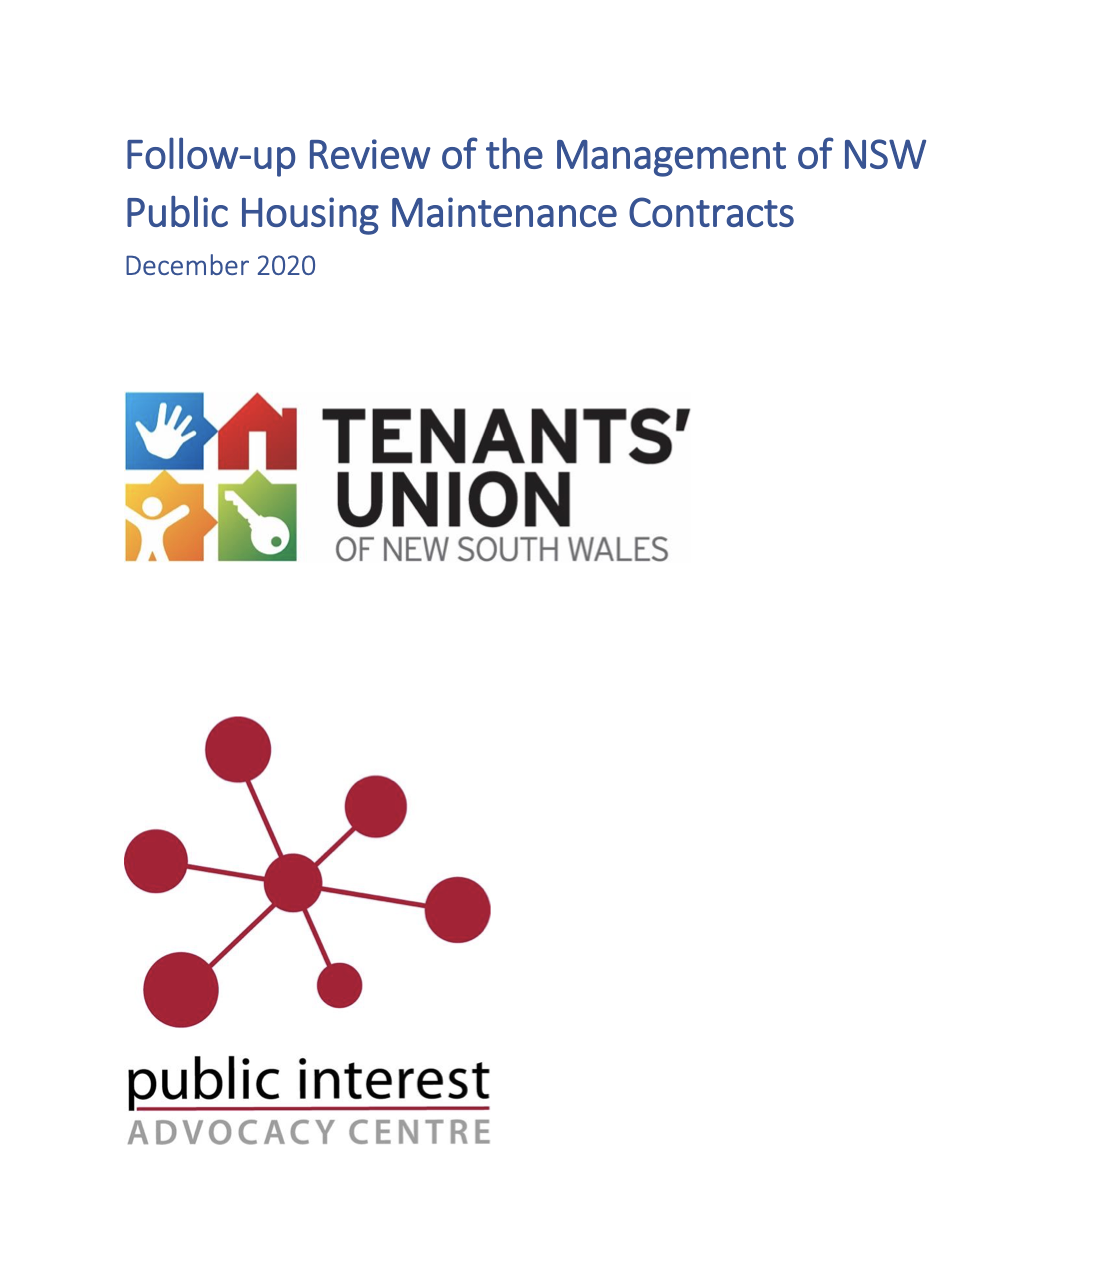 Screenshot of Title Page of PDF of Joint Submission reading: Follow-Up Review of the Management of NSW Public Housing Maintenence Contracts with Tenants Union NSW logo and Public Interest Advocacy Centre logo